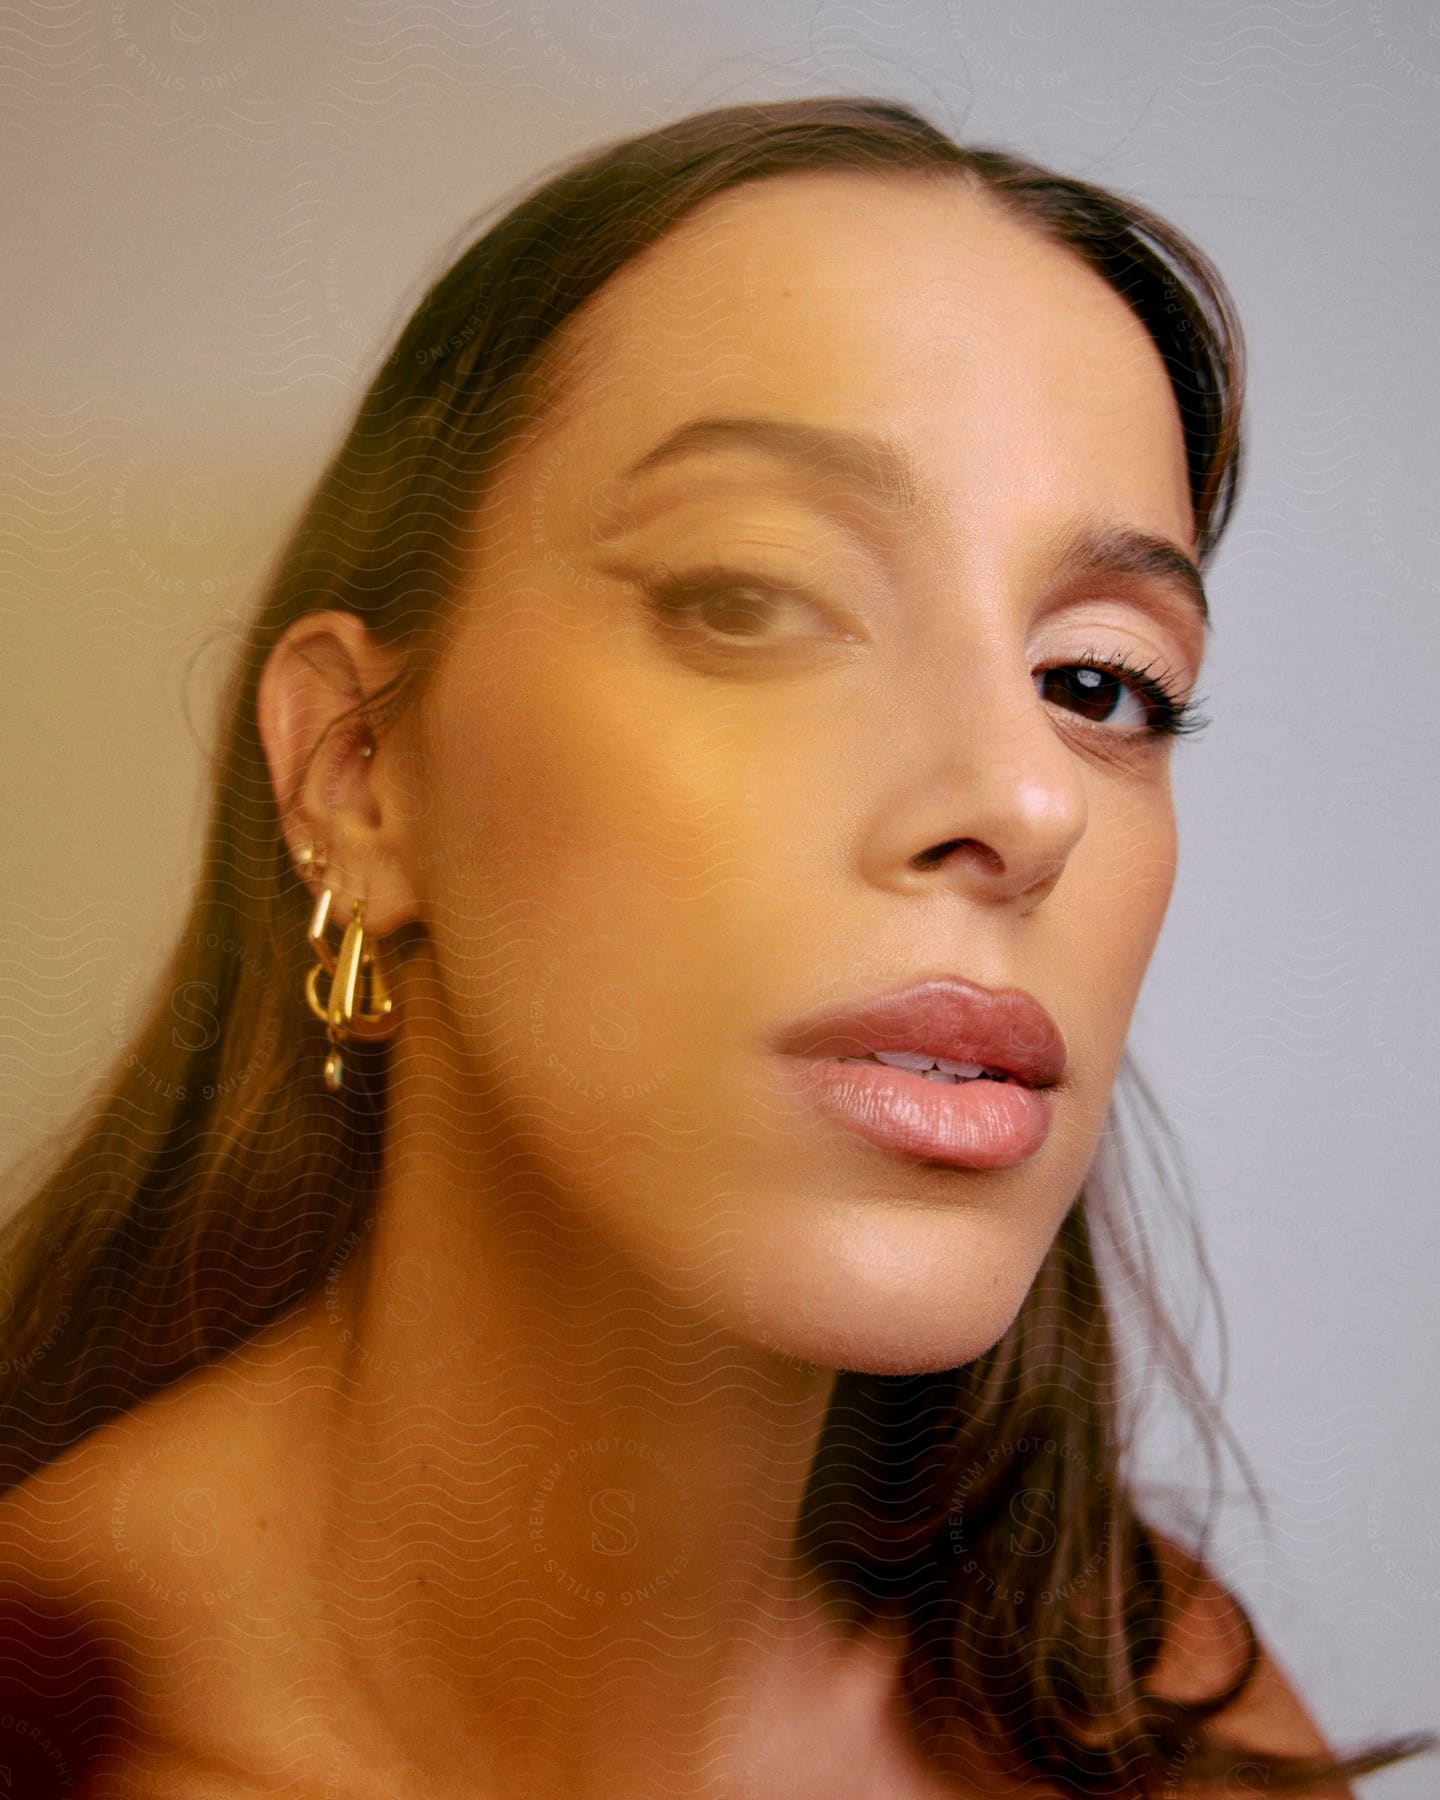 Portrait of a brown haired woman with gold earrings.